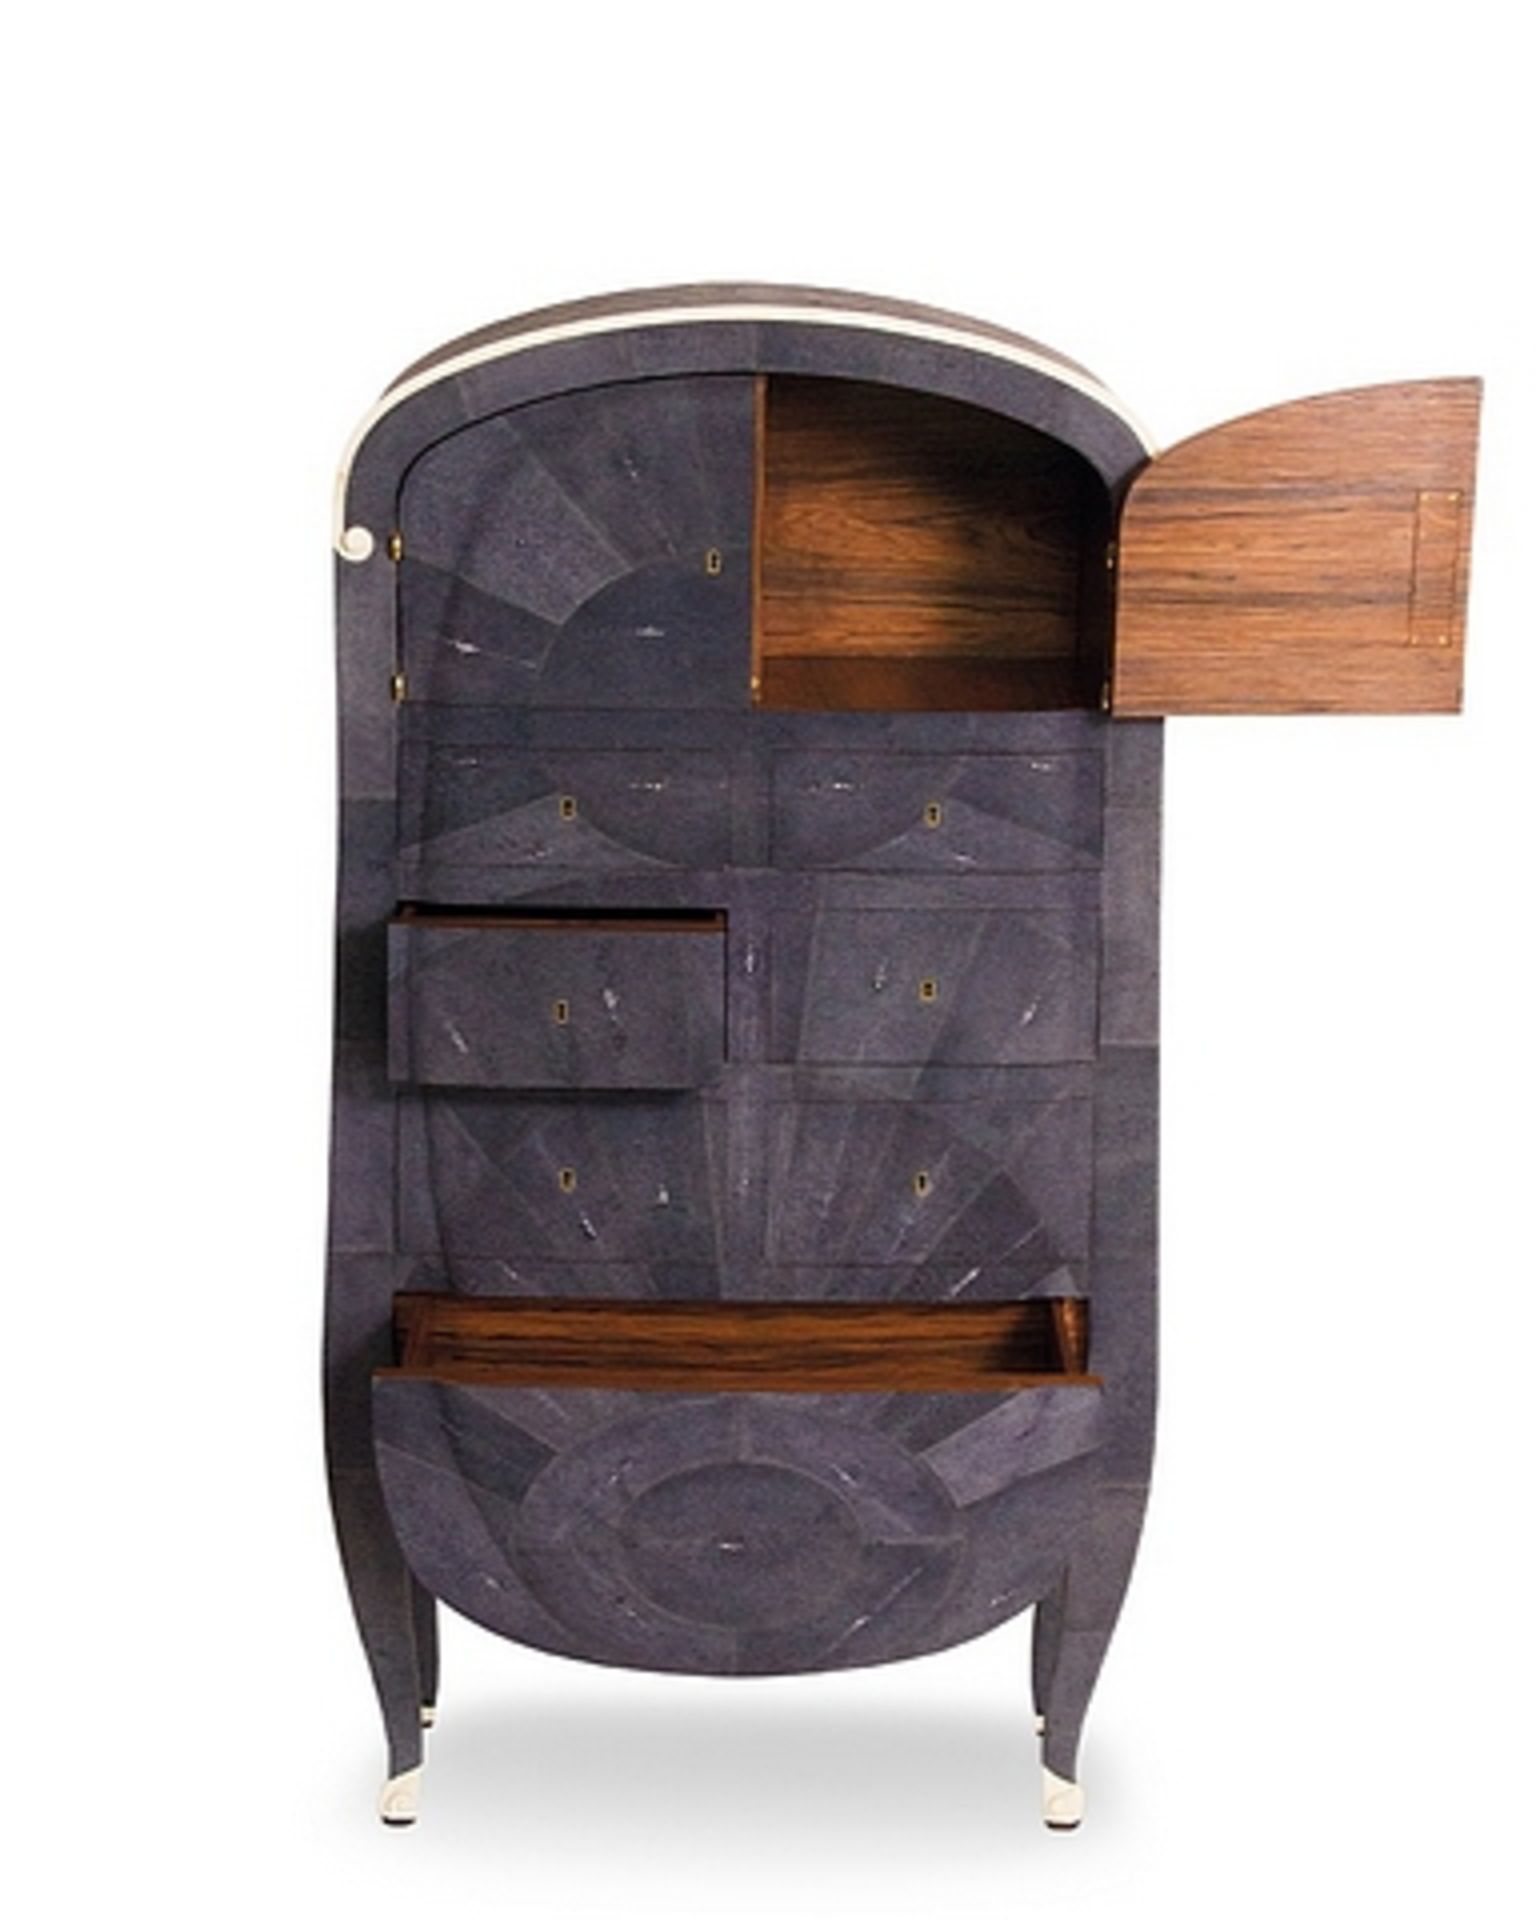 Louis male cabinet imposes on the viewer it's handsome and timeless appeal combined with luxurious - Image 3 of 5